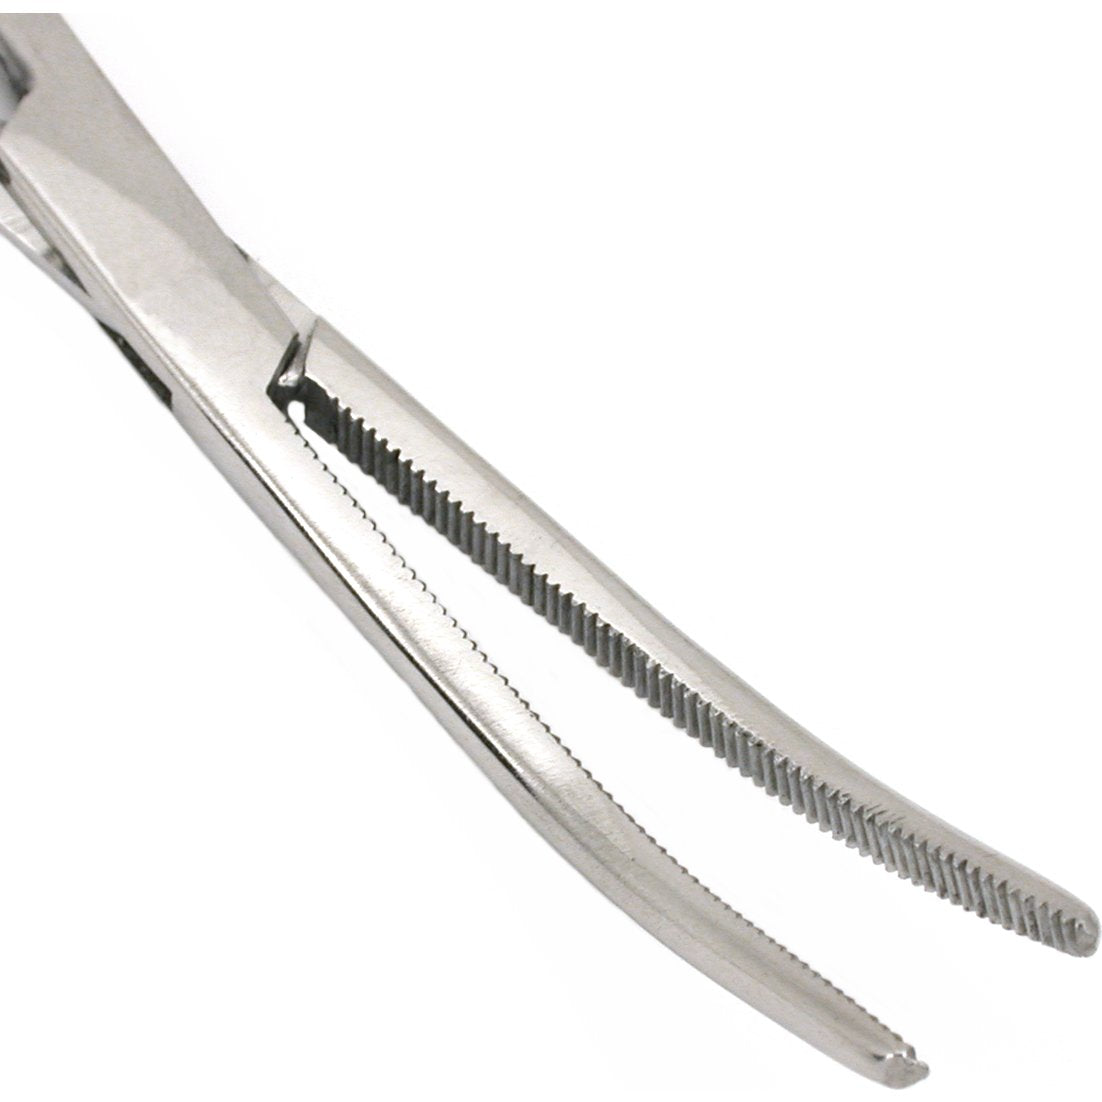 Curved Forceps Stainless Steel 8"